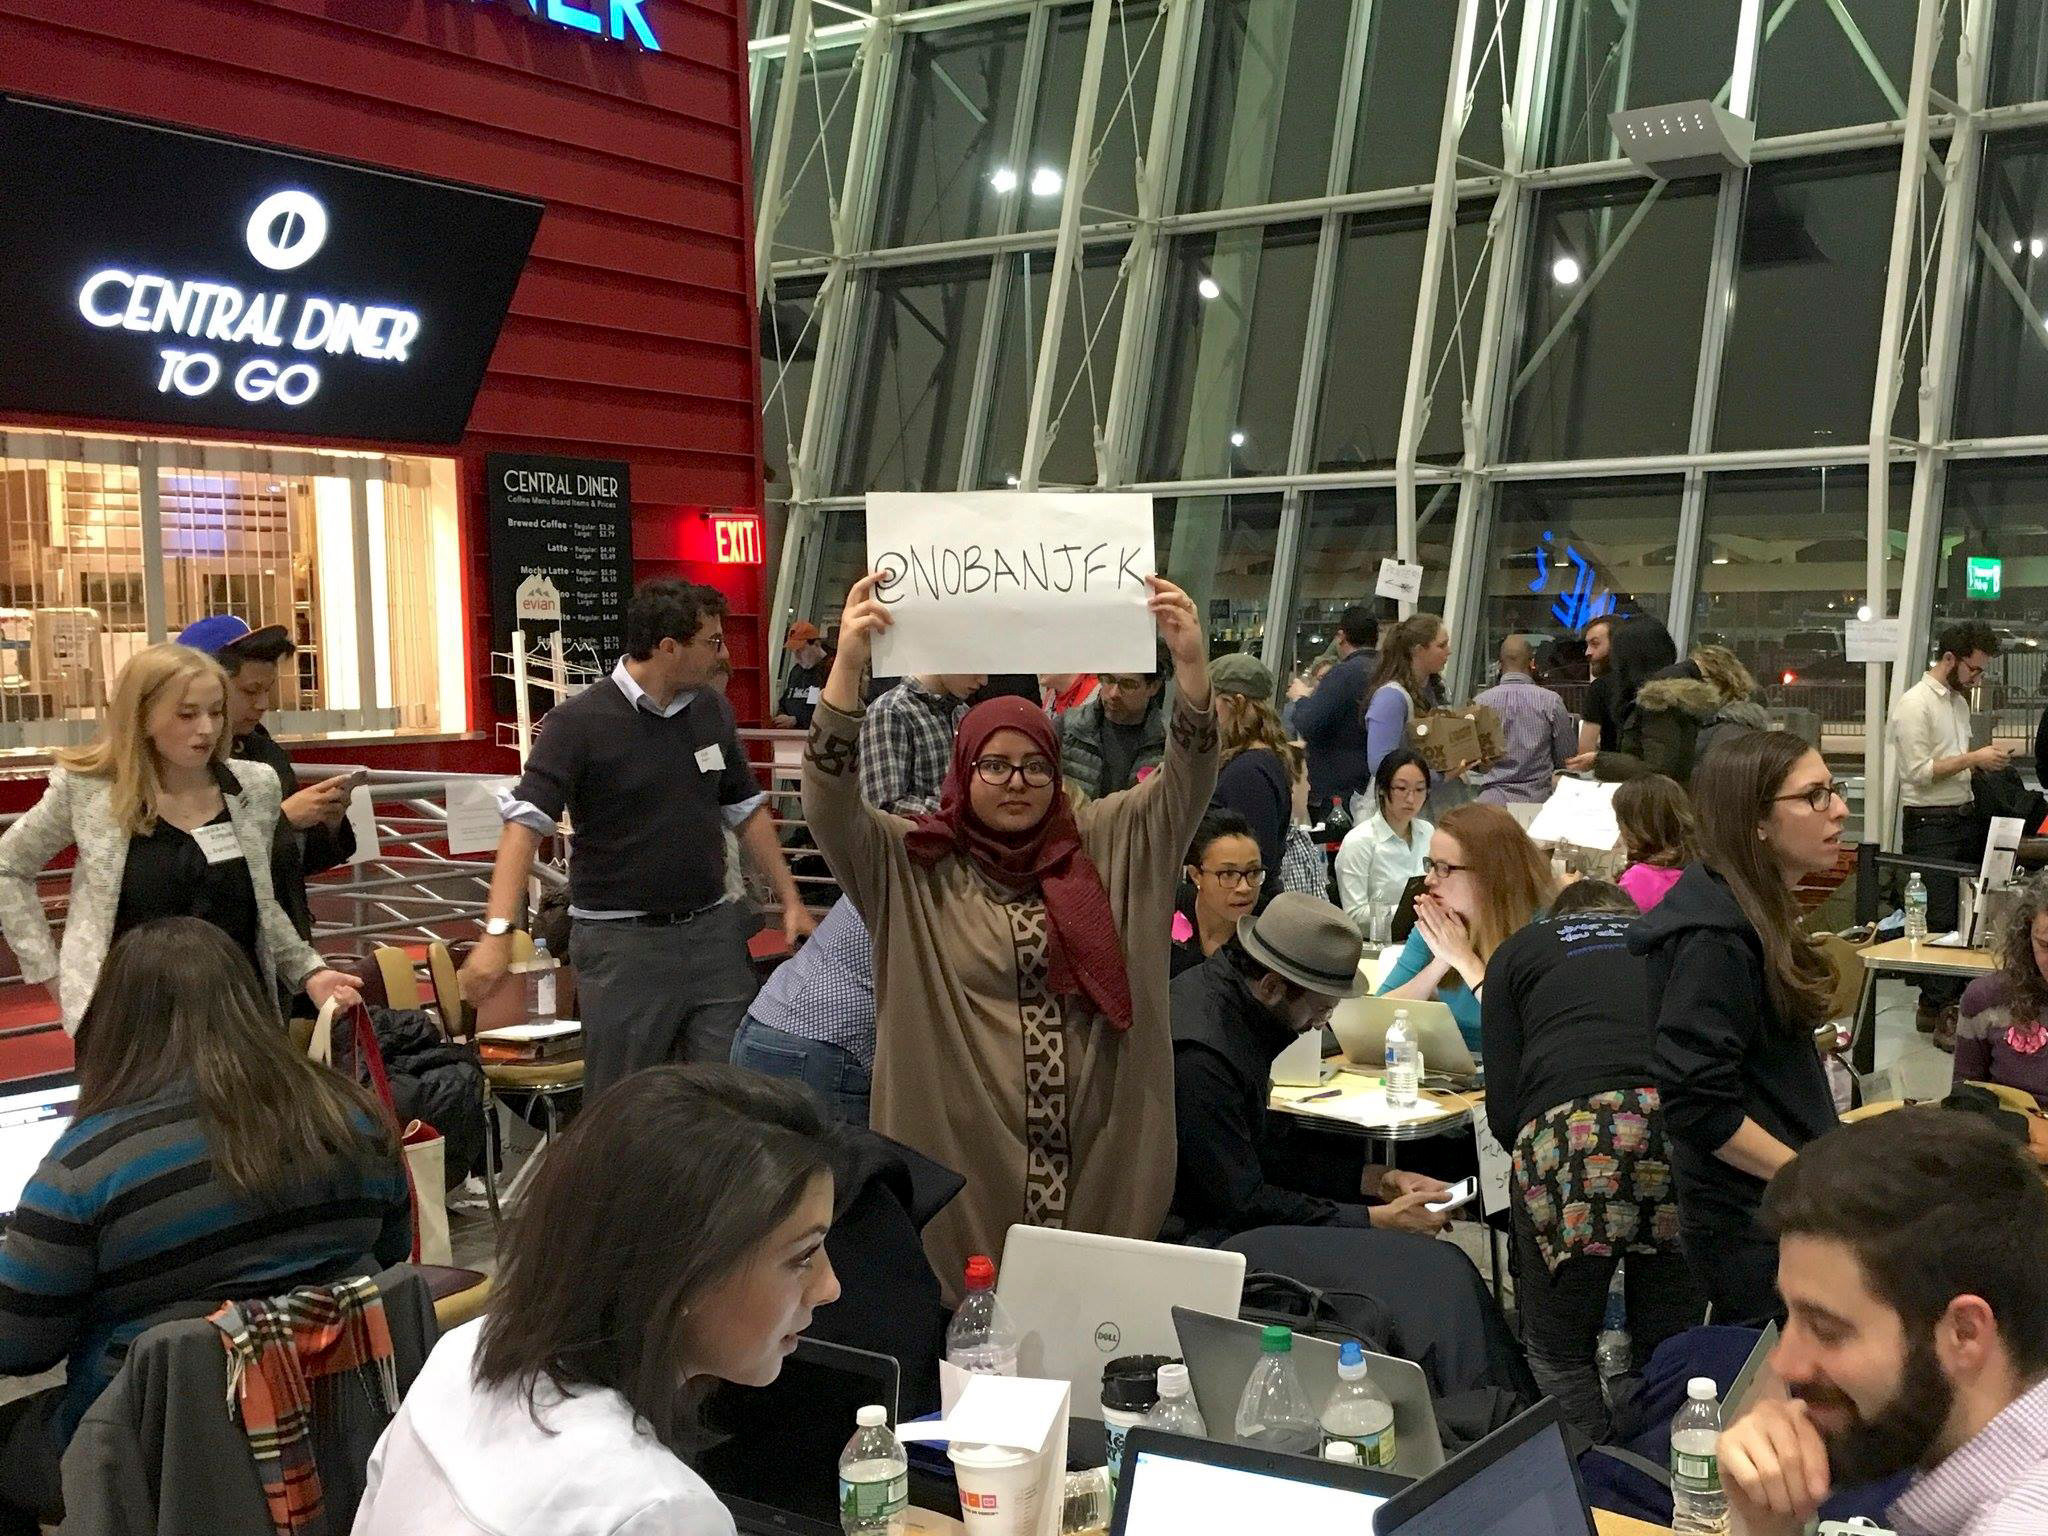 Legal volunteers mobilized over the weekend to offer free legal services to immigrants being held at JFK.